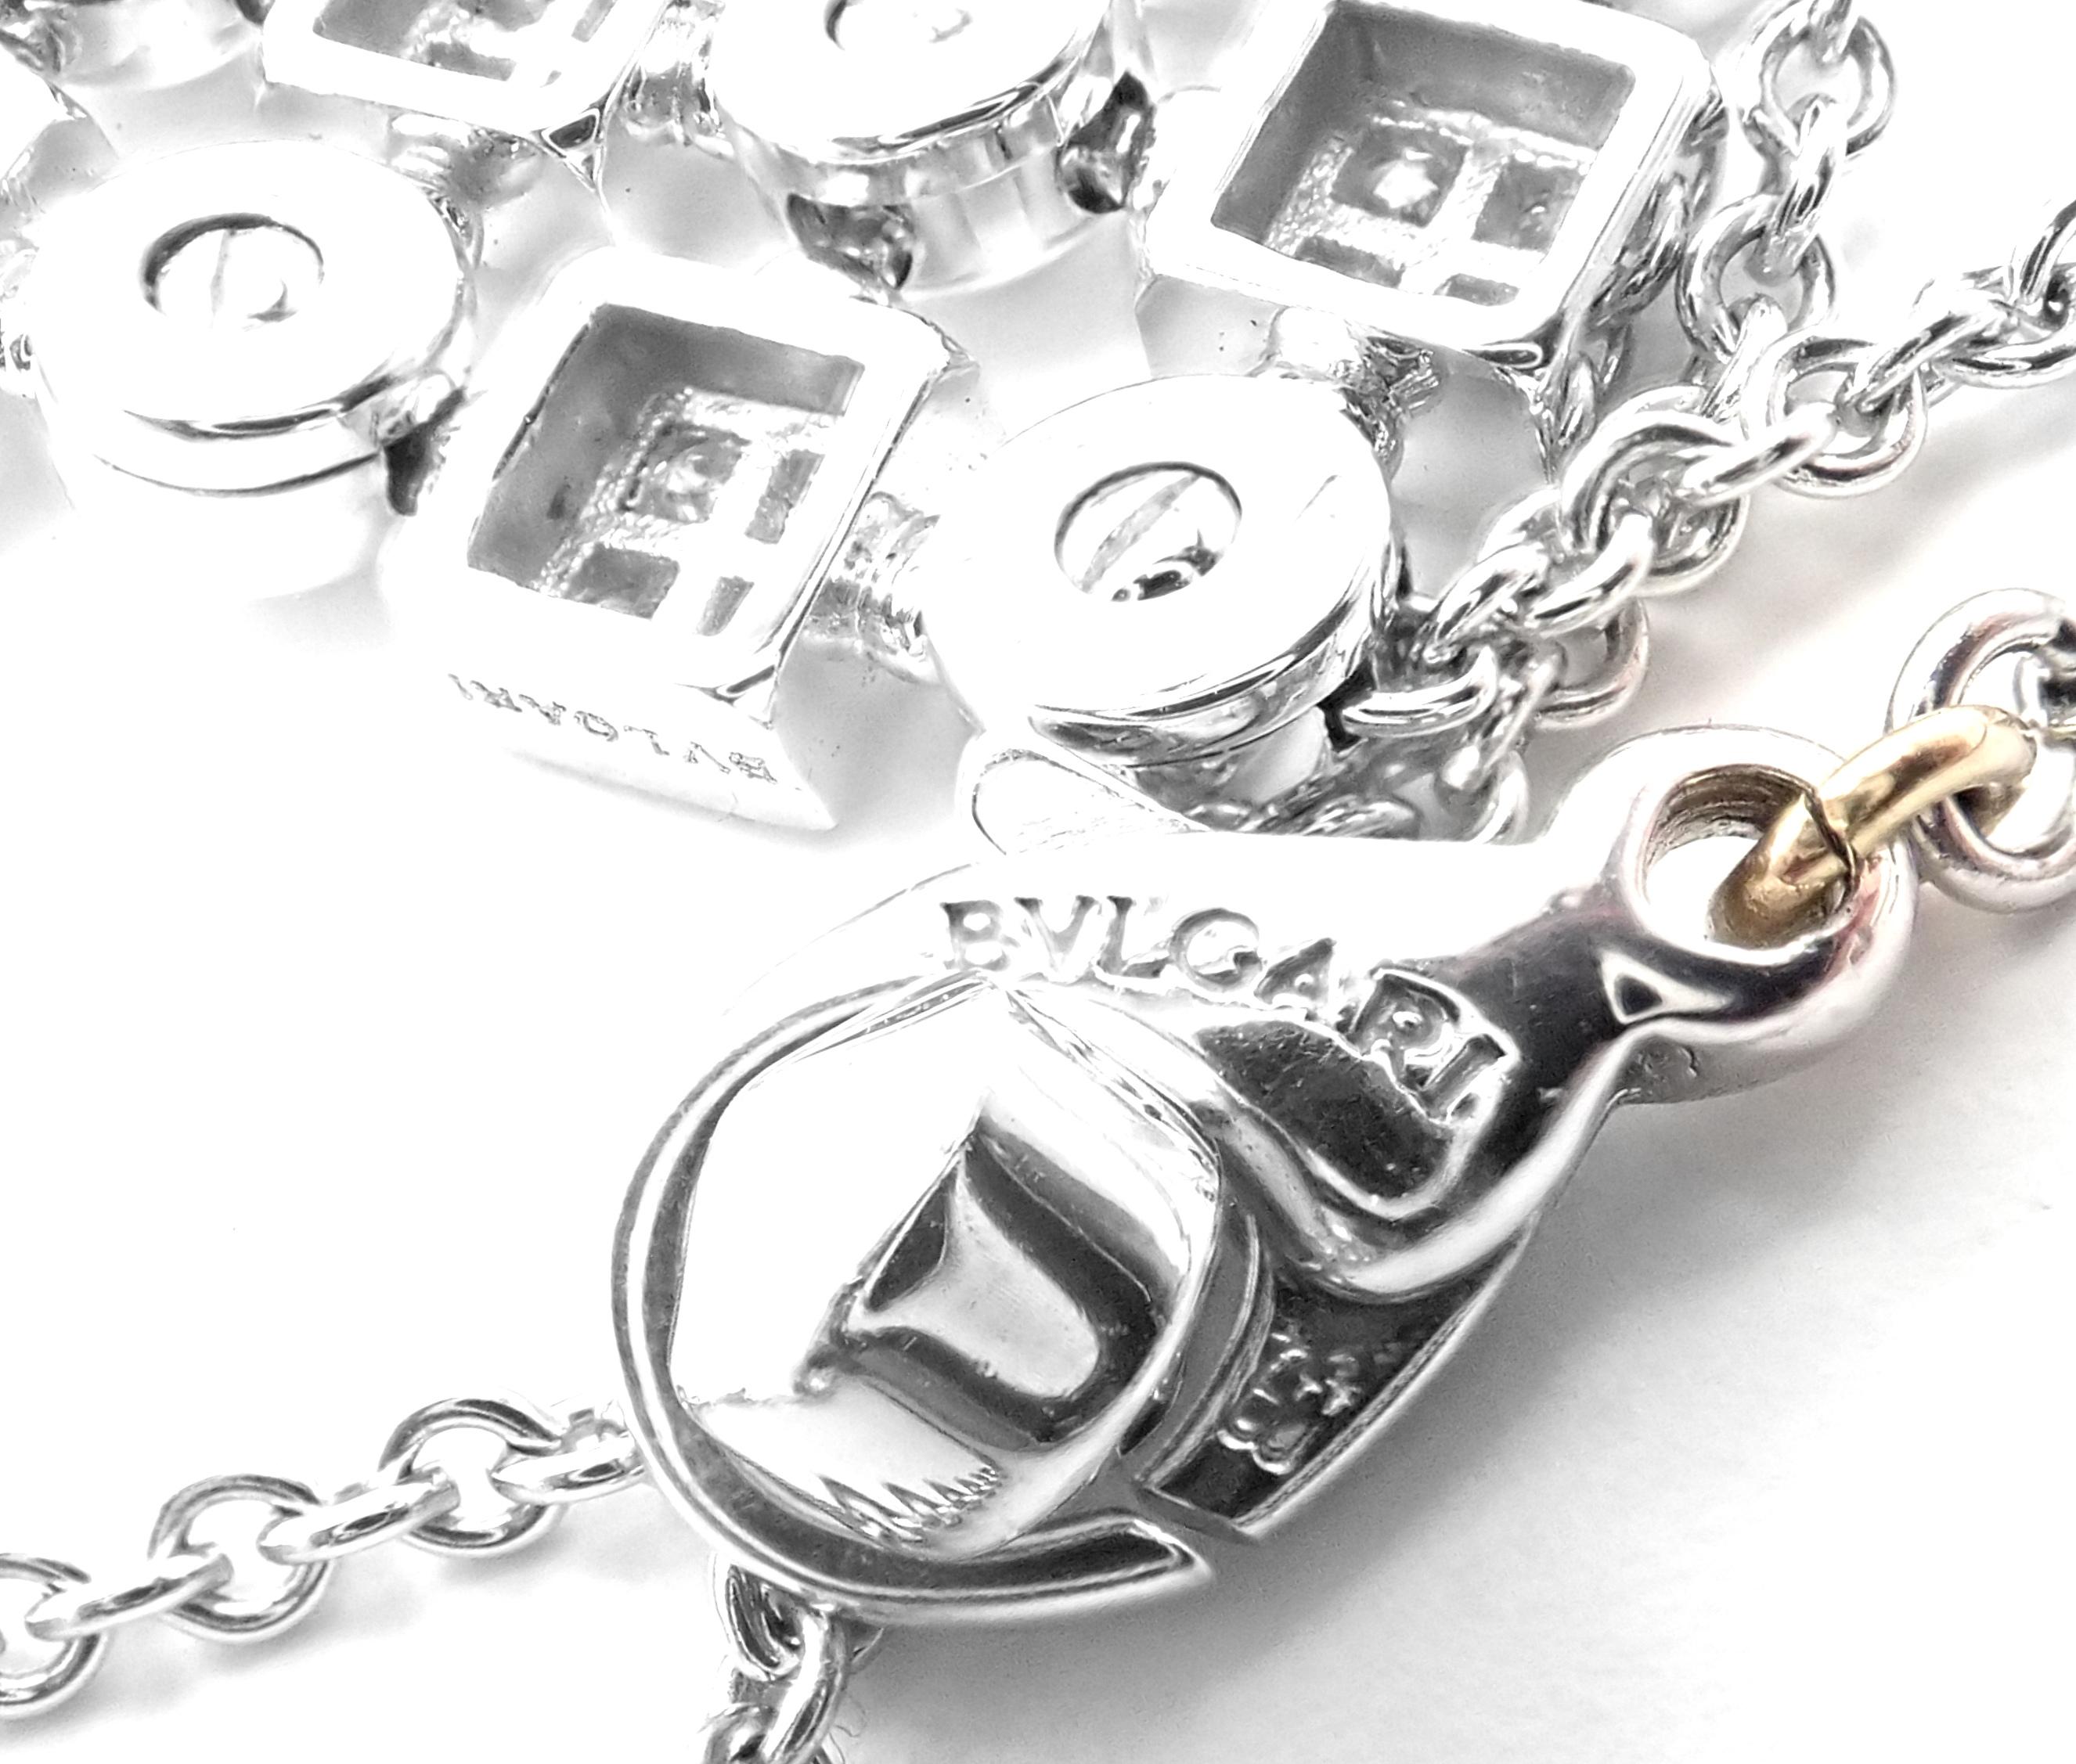 Bulgari Lucea Diamond White Gold Pendant Necklace In Excellent Condition For Sale In Holland, PA